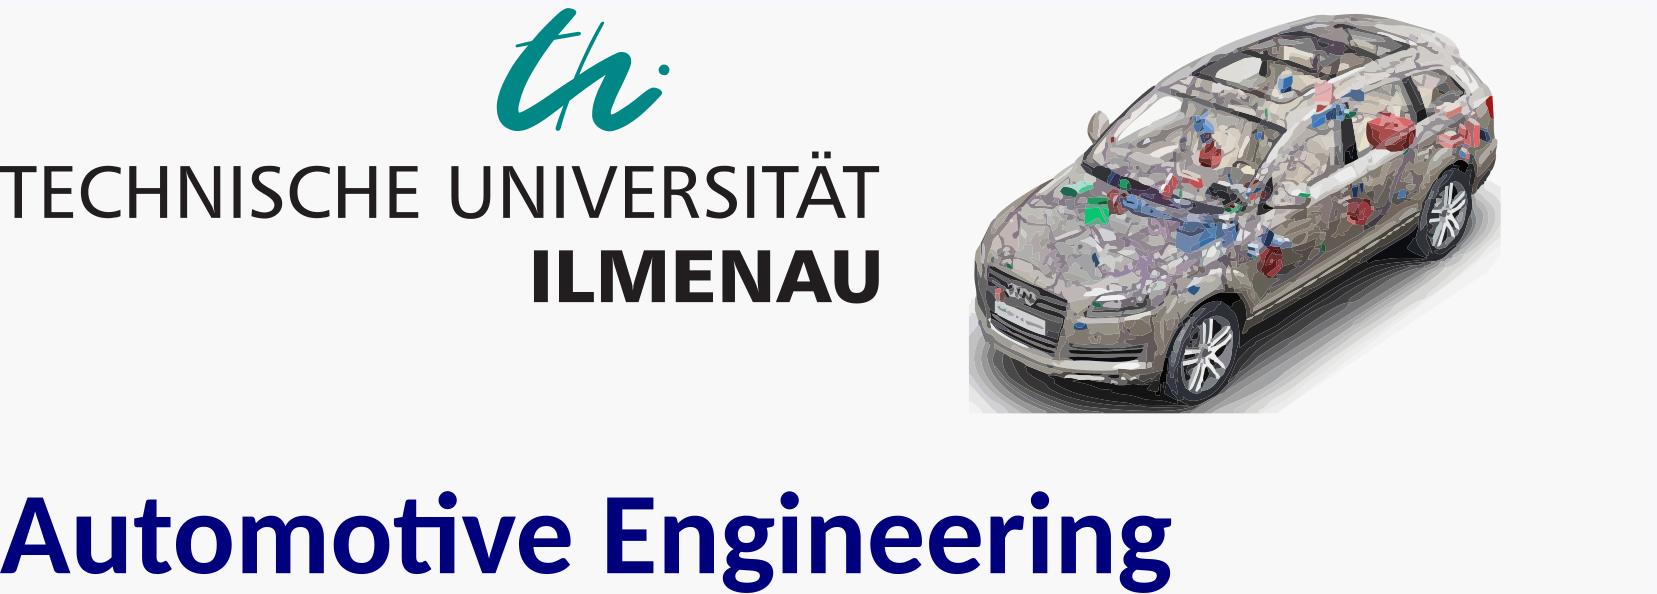 Automotive Engineering - GRIAT double degree